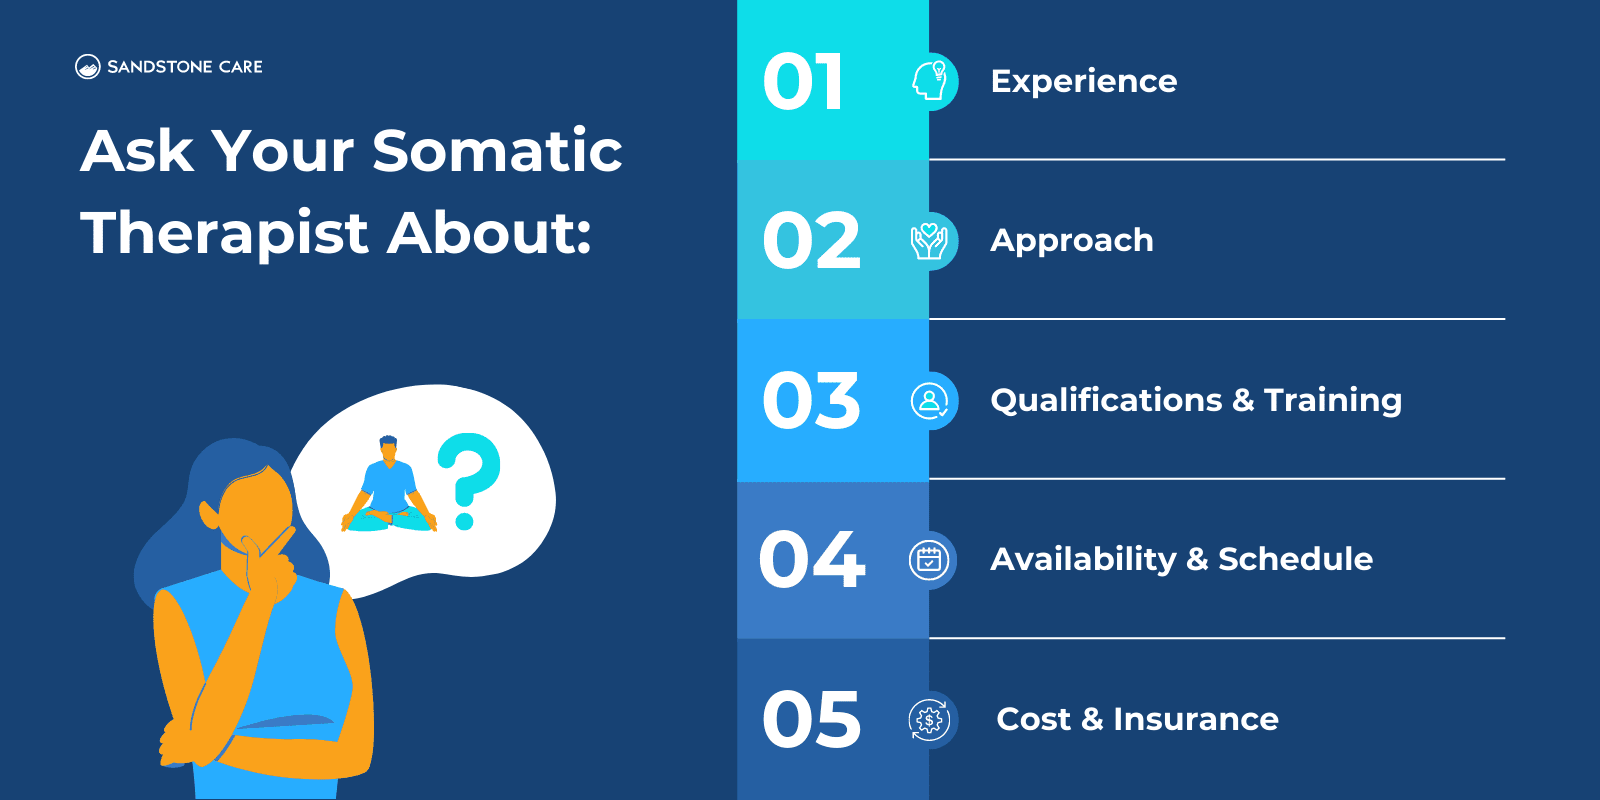 Somatic therapist checklist to find the best one for you